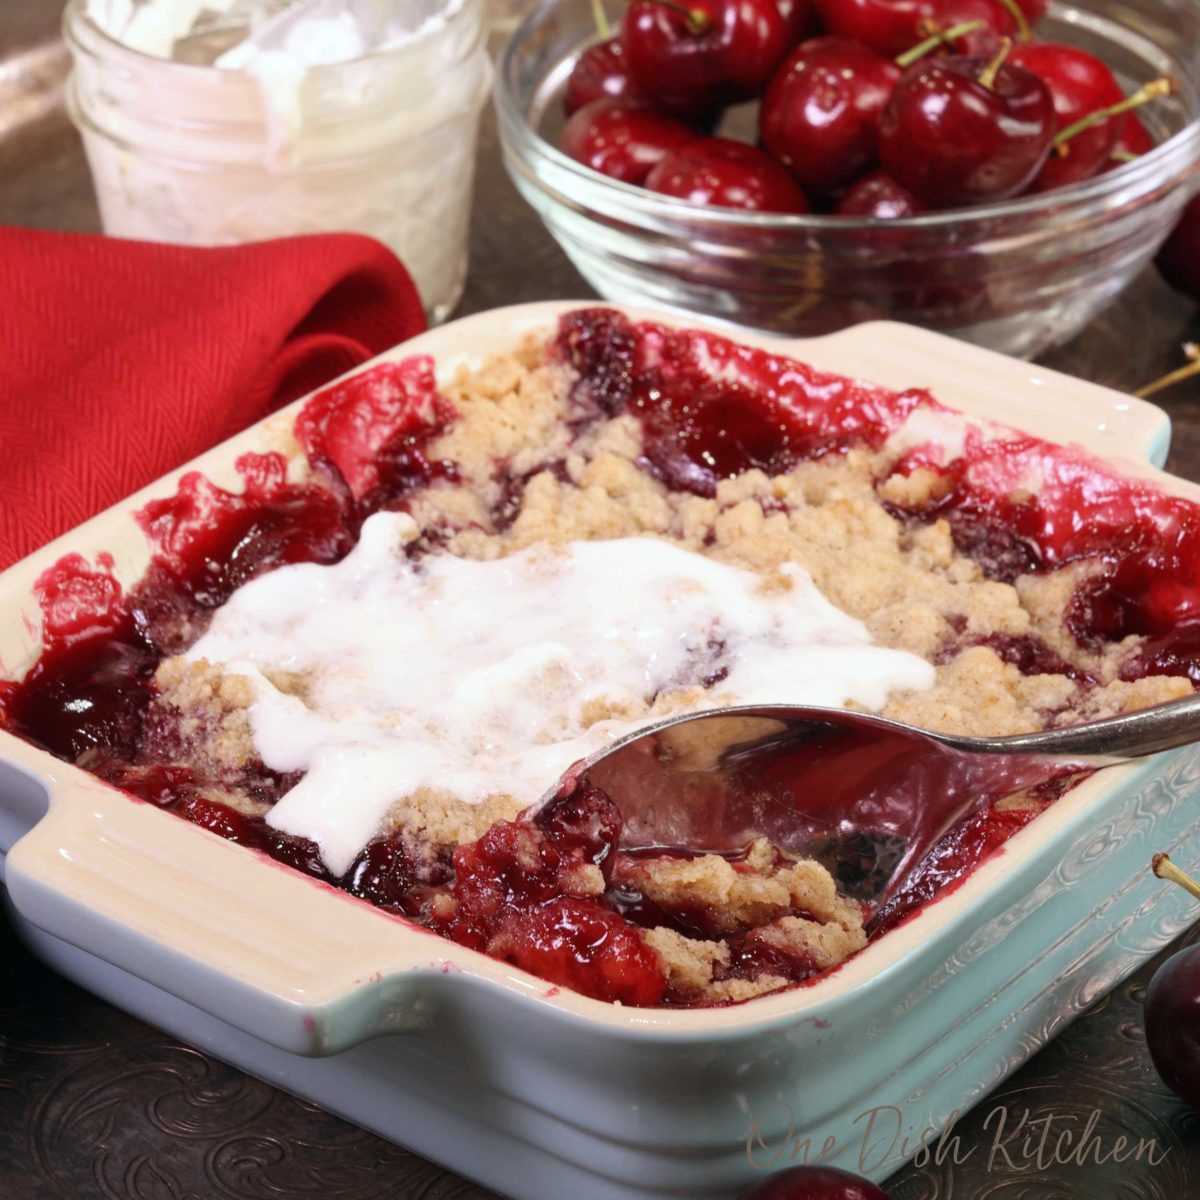 a spoon inserted in the corner of a cherry pie next to a bowl of fresh cherries and a jar of whipped cream.